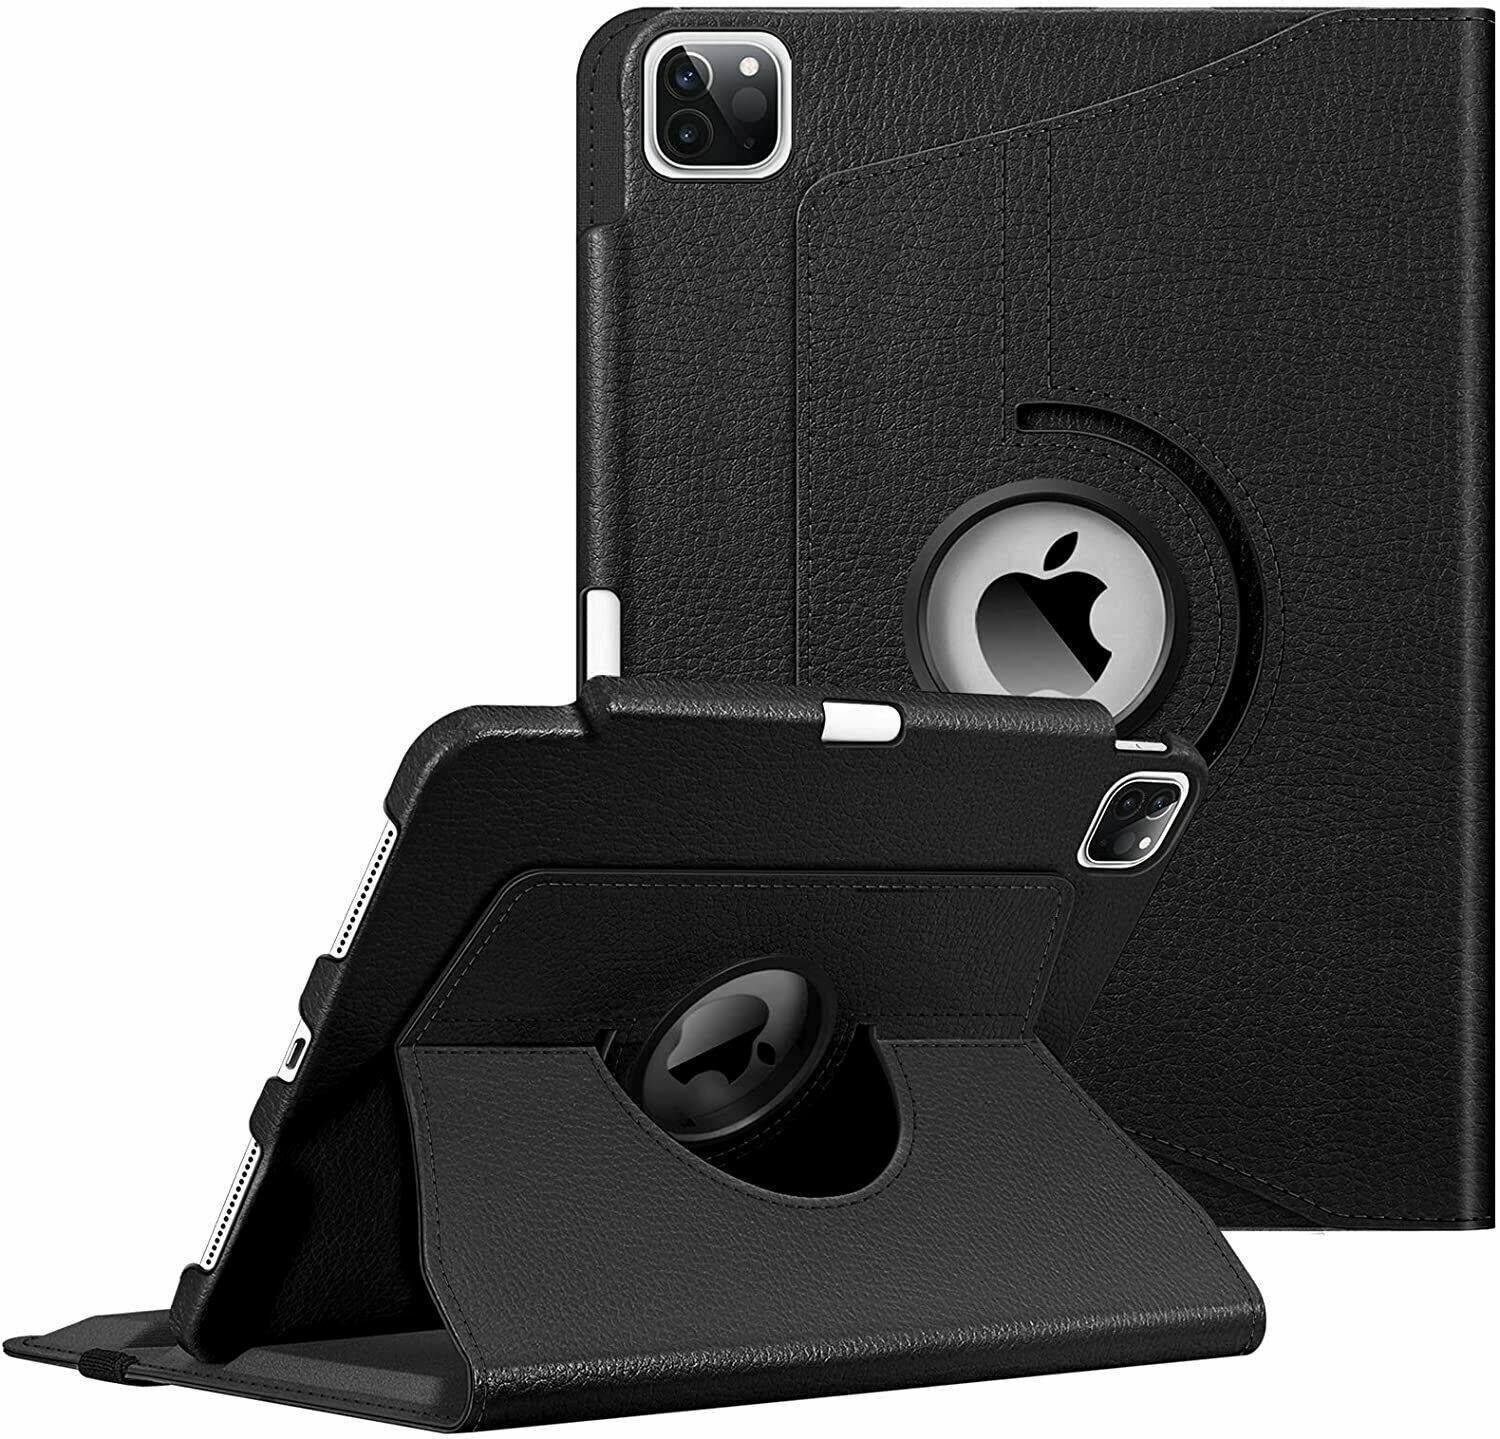 Rotating Case for iPad Pro 11 Inch 3rd Gen 2021 360 Degree Swiveling Stand Cover